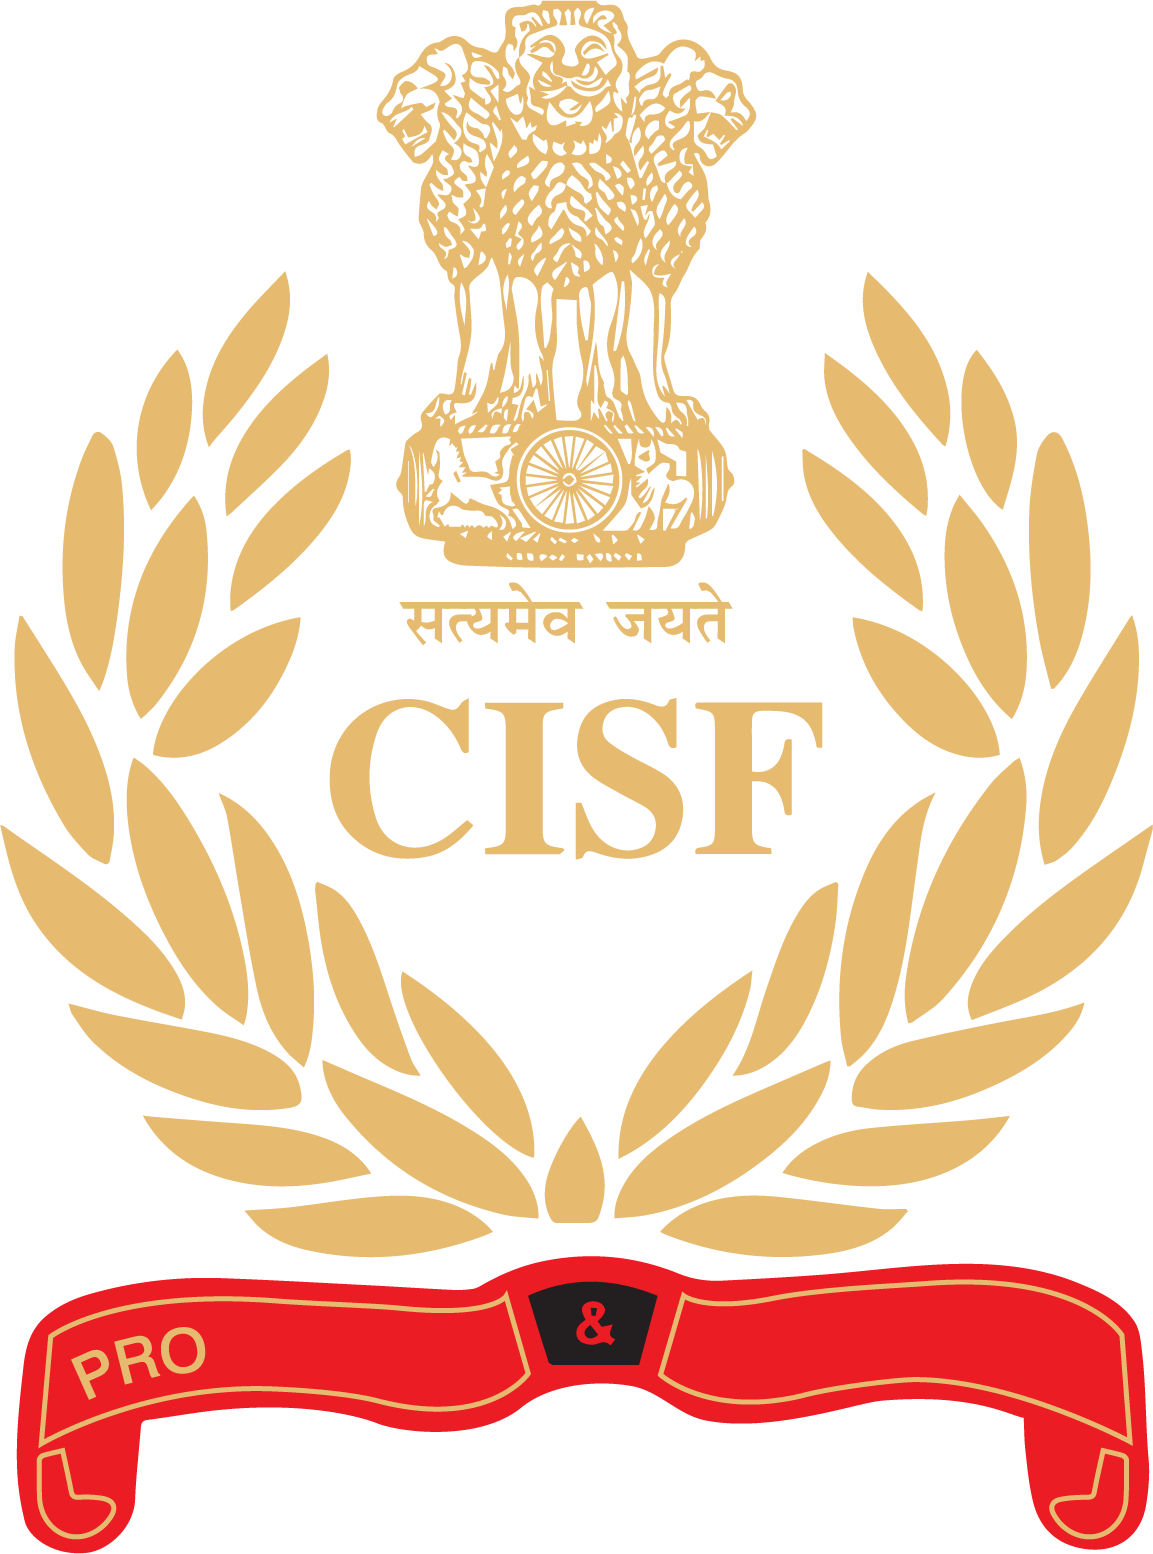 Read all Latest Updates on and about CISF